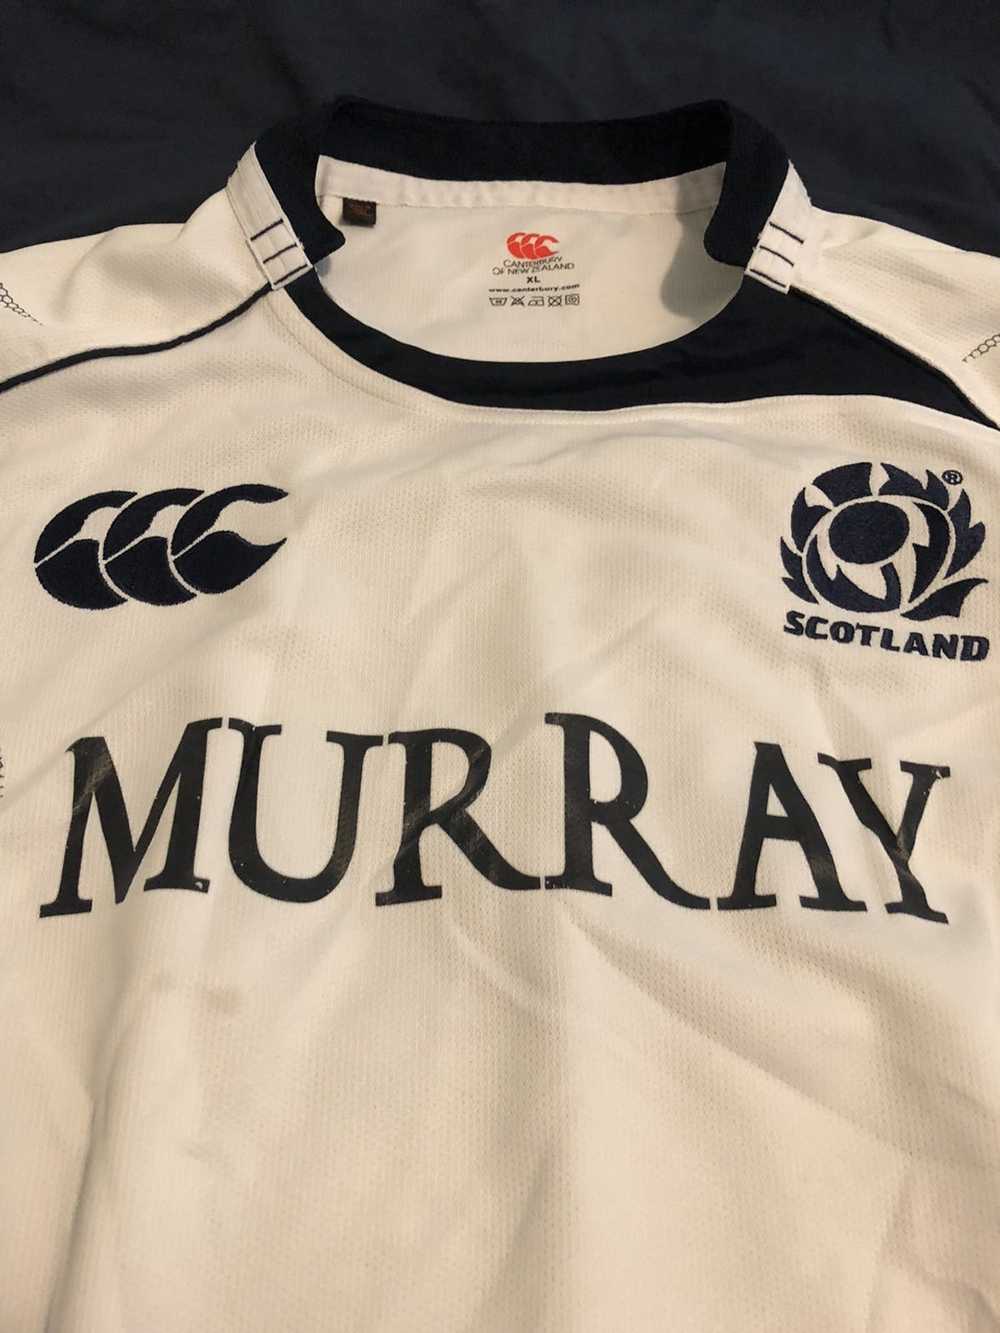 Canterbury Of New Zealand Scotland rugby jersey - image 2